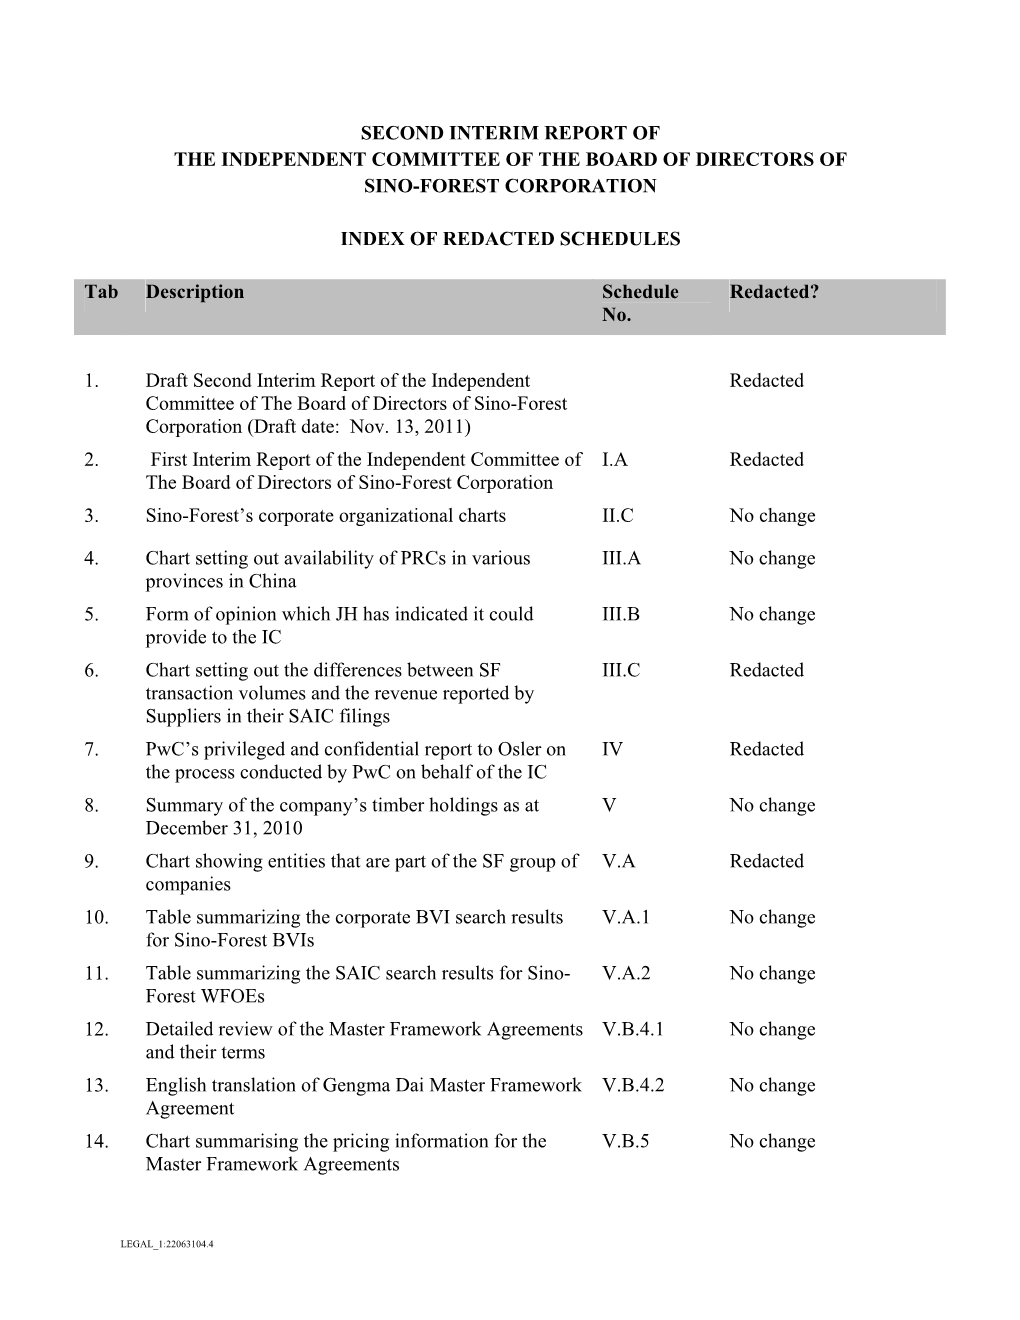 Second Interim Report of the Independent Committee of the Board of Directors of Sino-Forest Corporation